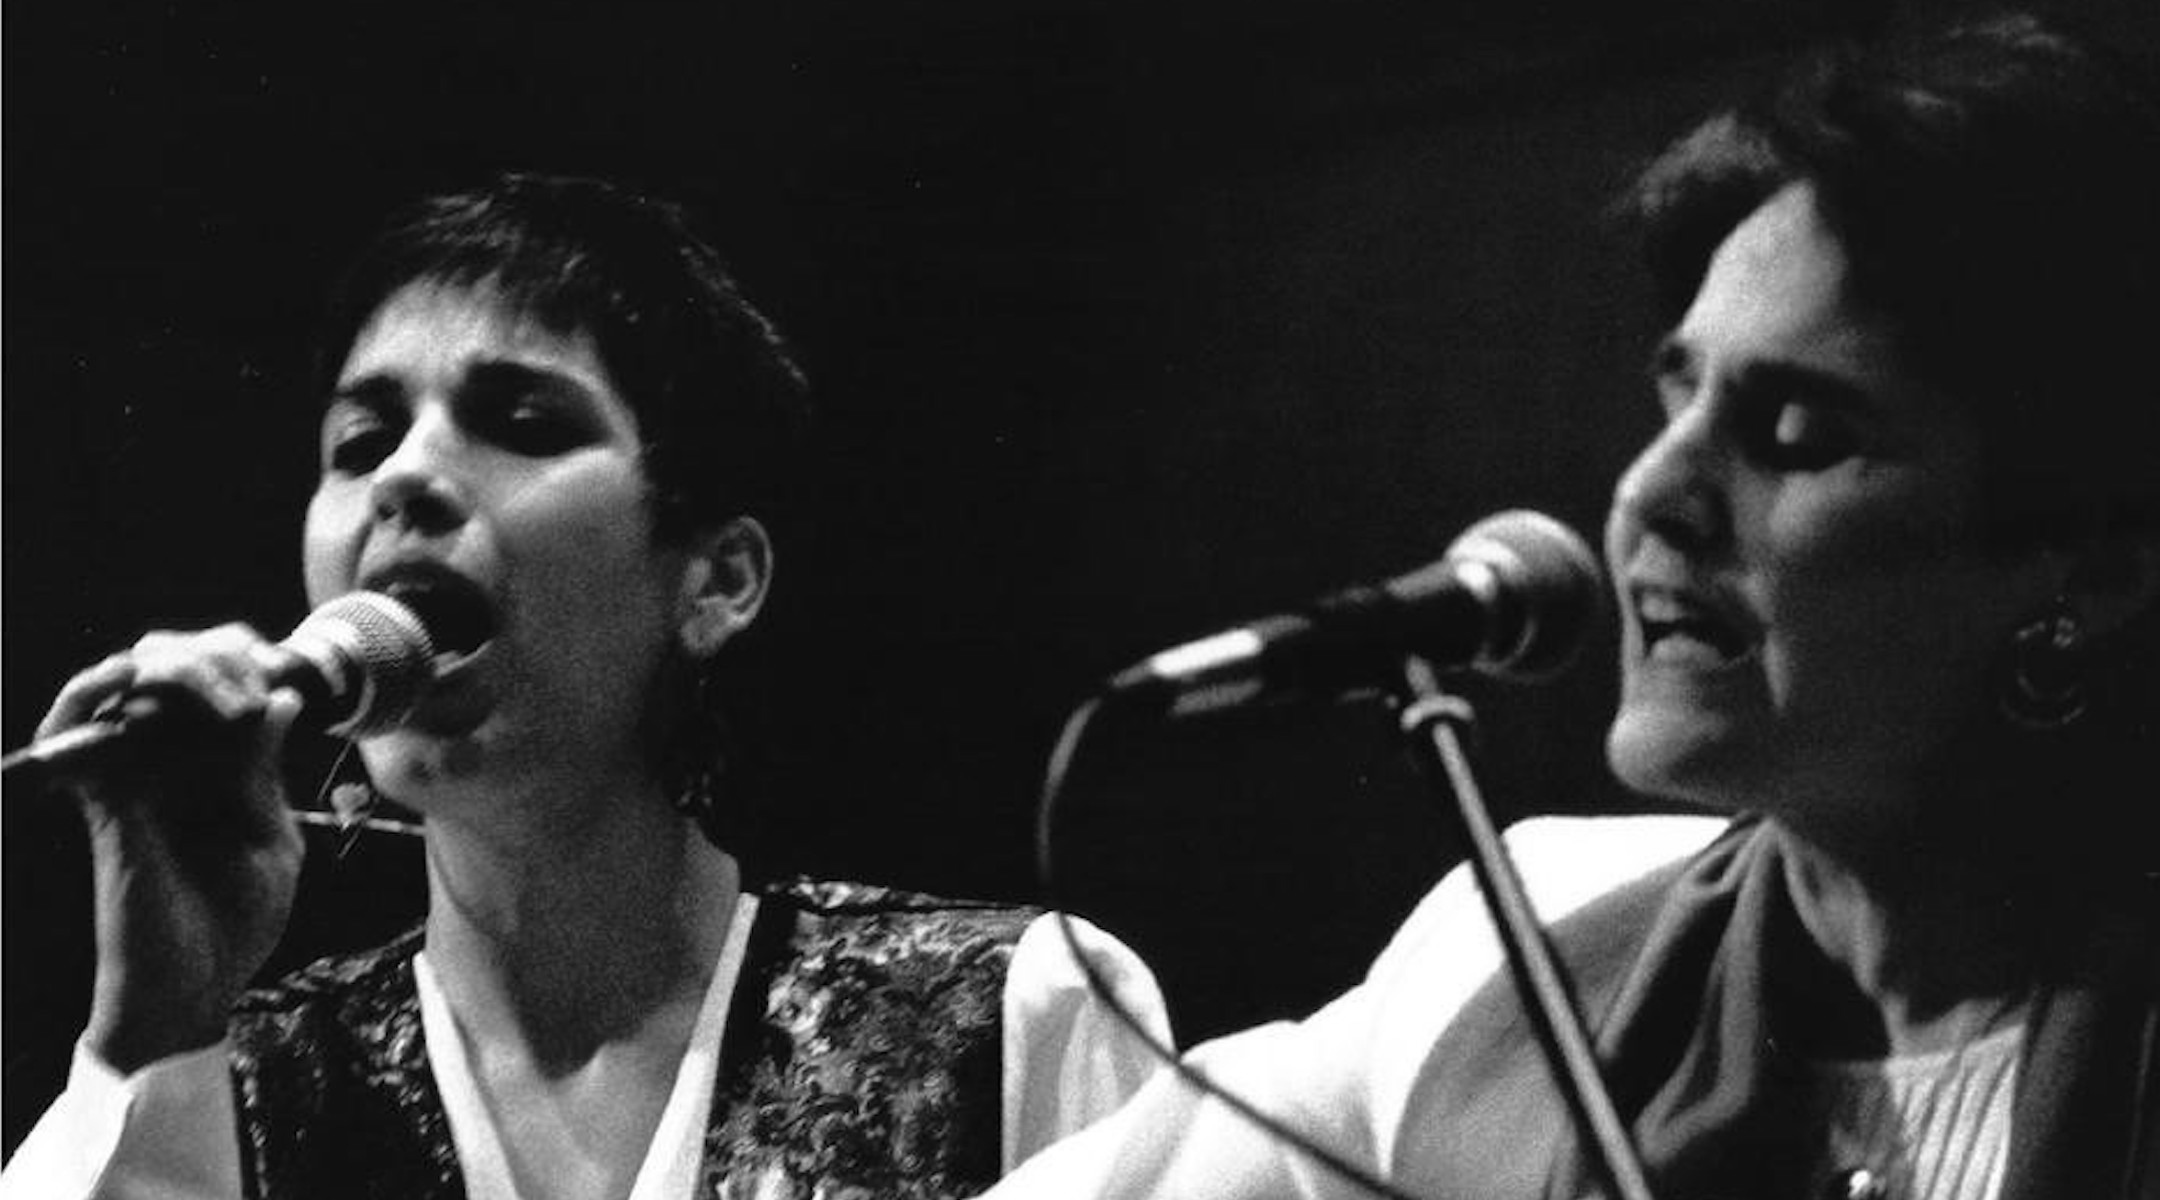 Bat Ella, left, met Debbie Friedman, right, more than 30 years ago. Today, she is trying to continue the singer’s legacy by translating her music to Hebrew and spreading her egalitarian message across Israel. (Courtesy)